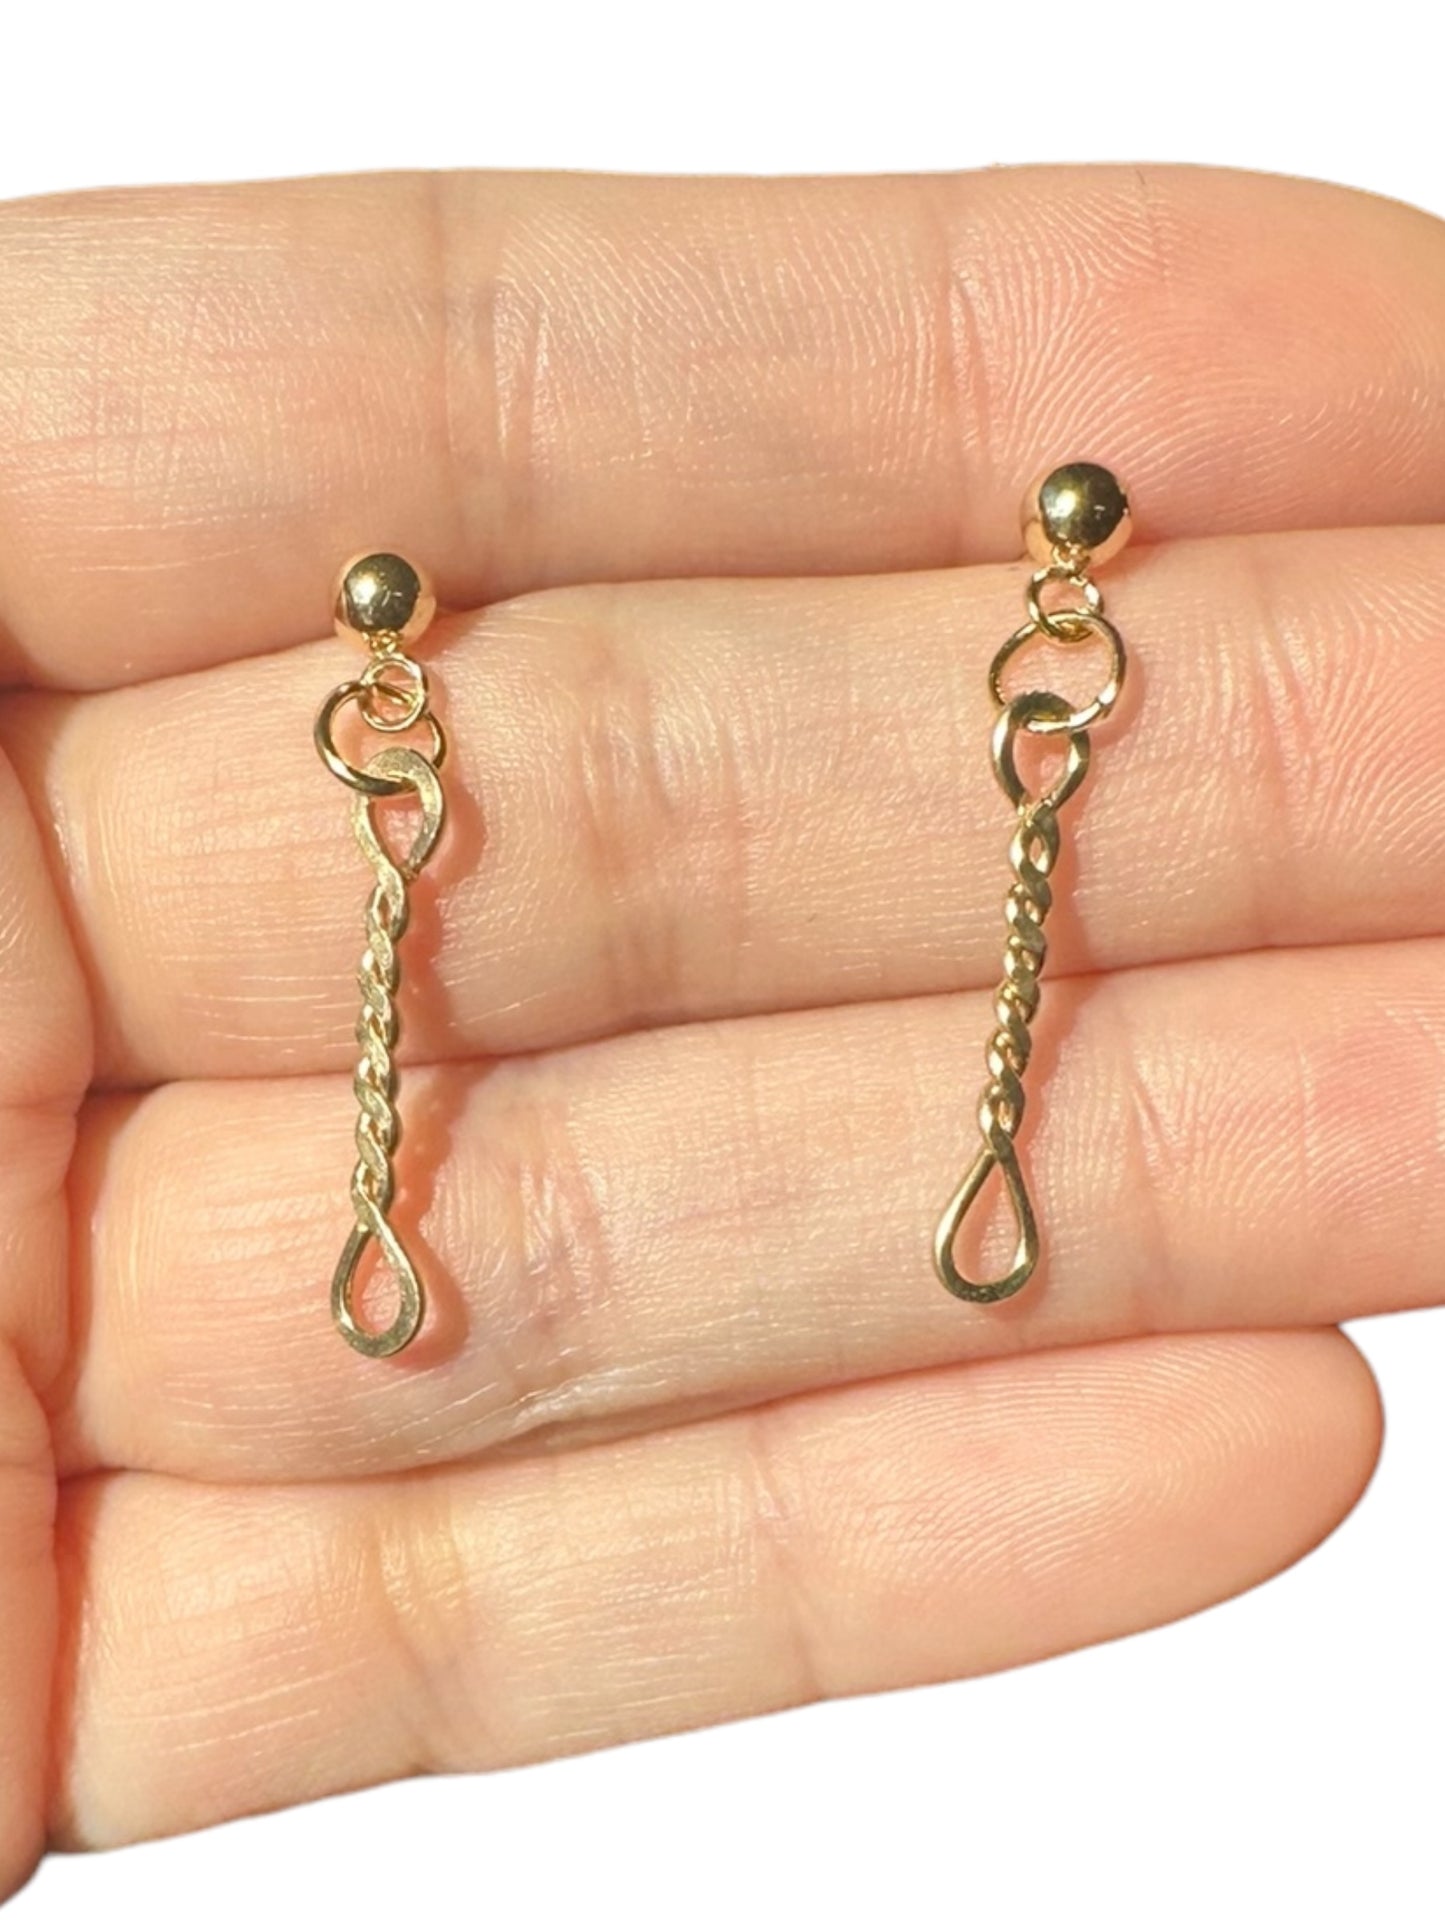 Sterling Silver | 14KT Gold Filled Twisted Wire Earrings